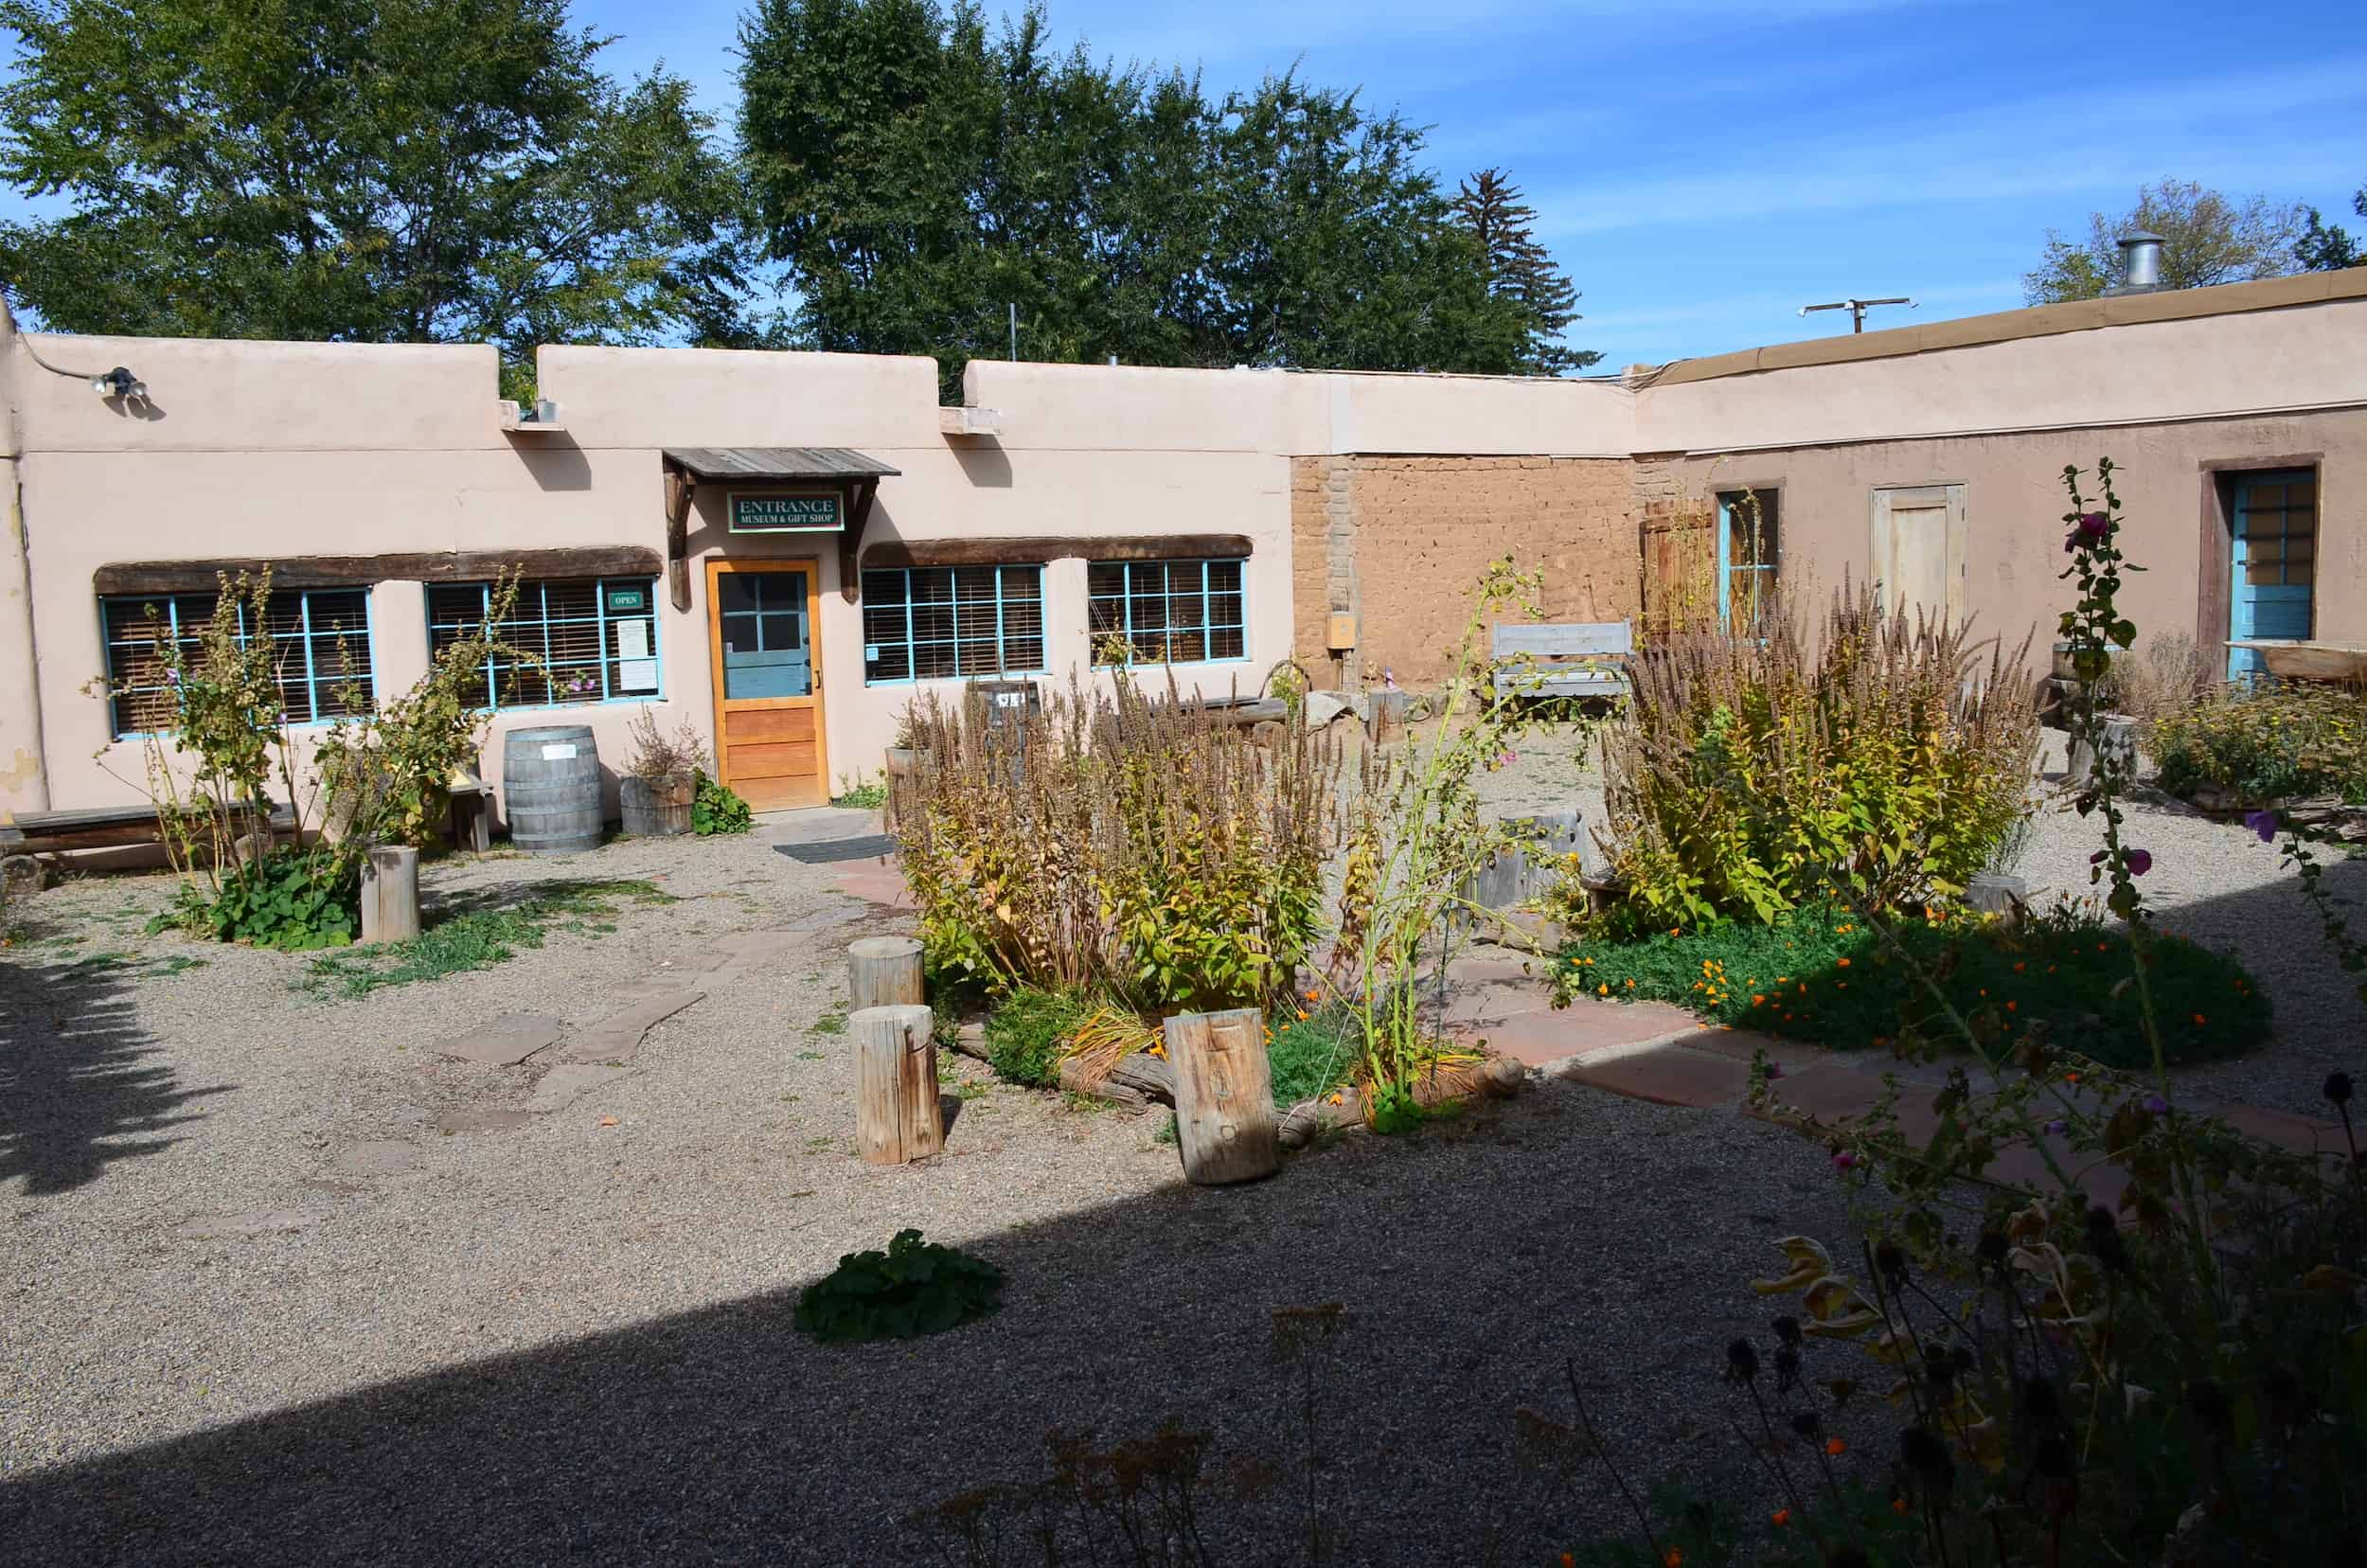 Courtyard at the Kit Carson Home and Museum in Taos, New Mexico